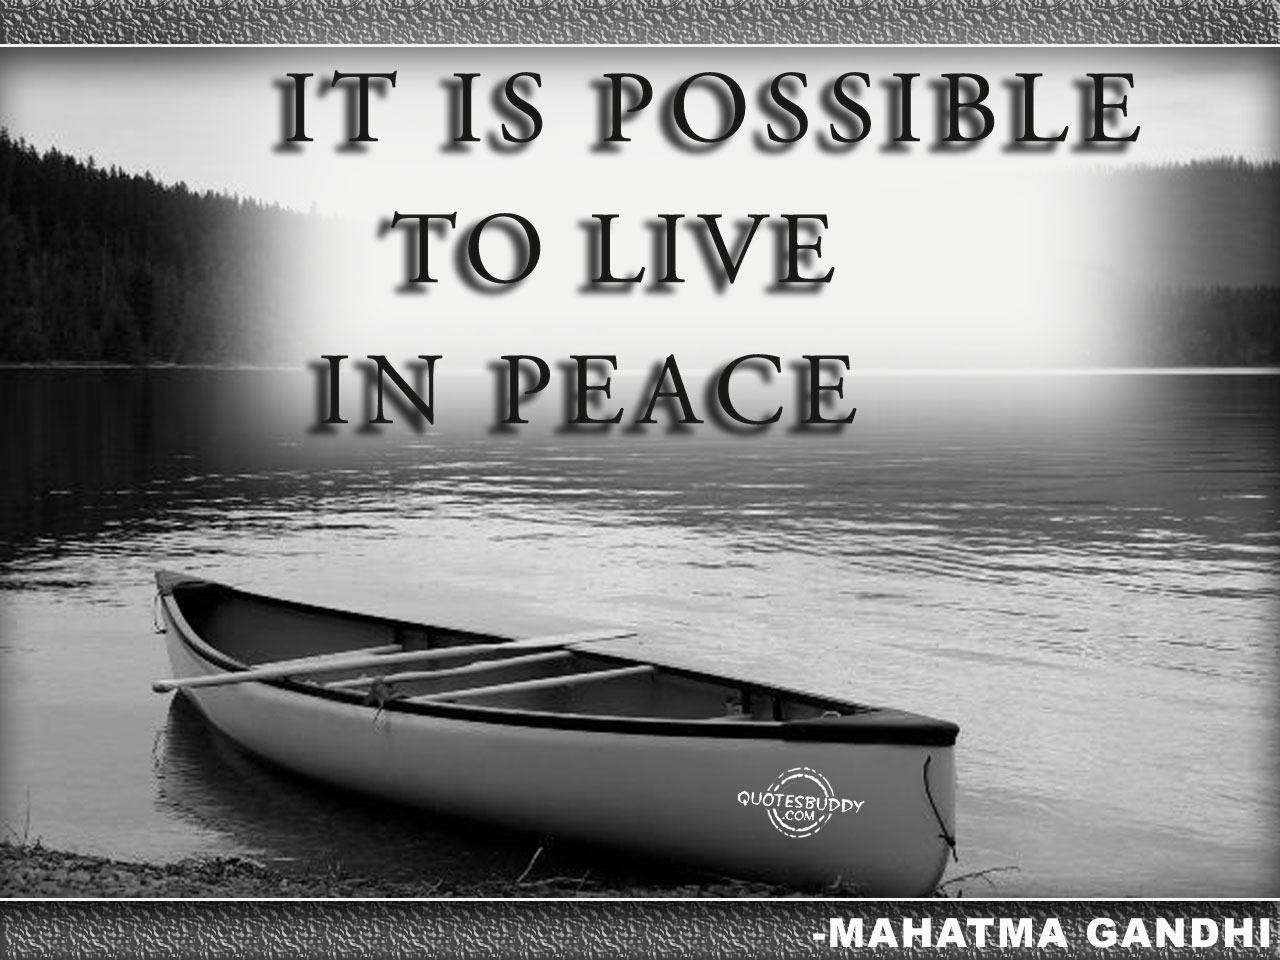 It is possible to live in peace - Mahatma Gandhi